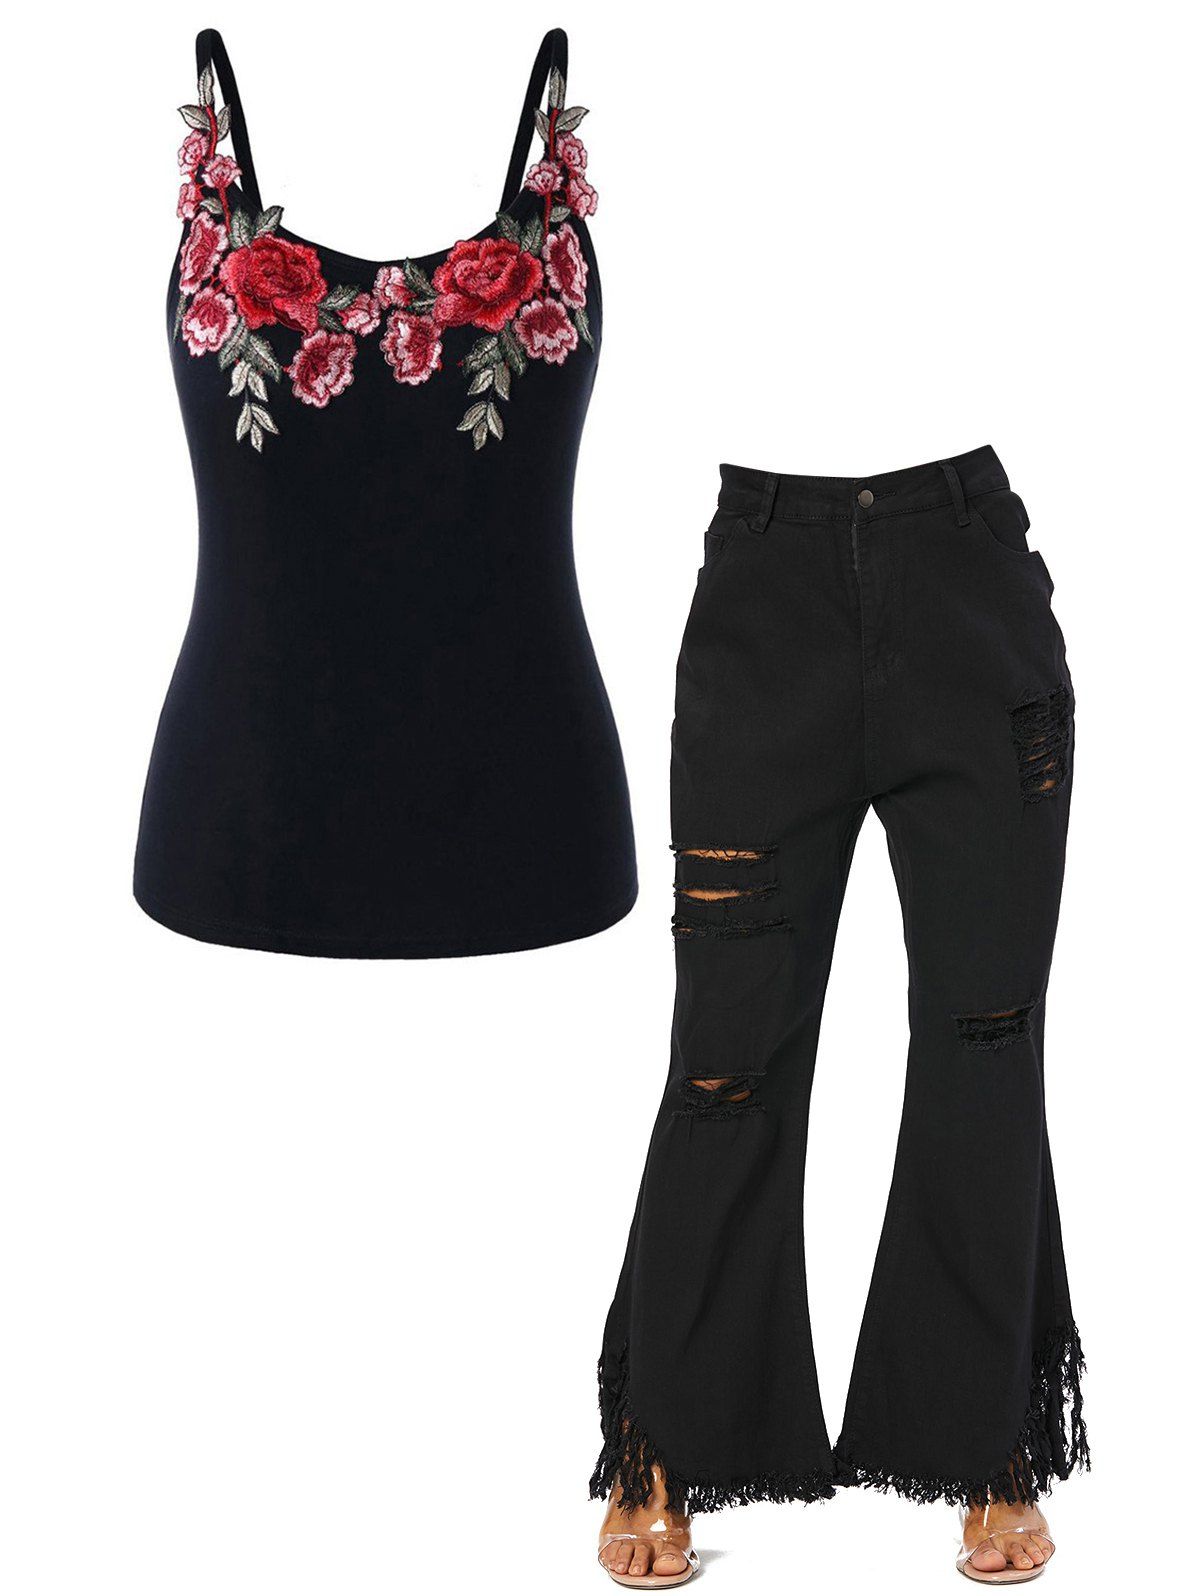 Plus Size Flower Leaf Embroidery Applique Tank Top And Frayed Hem Distressed Pockets Flare Jeans Outfit - BLACK 1XL